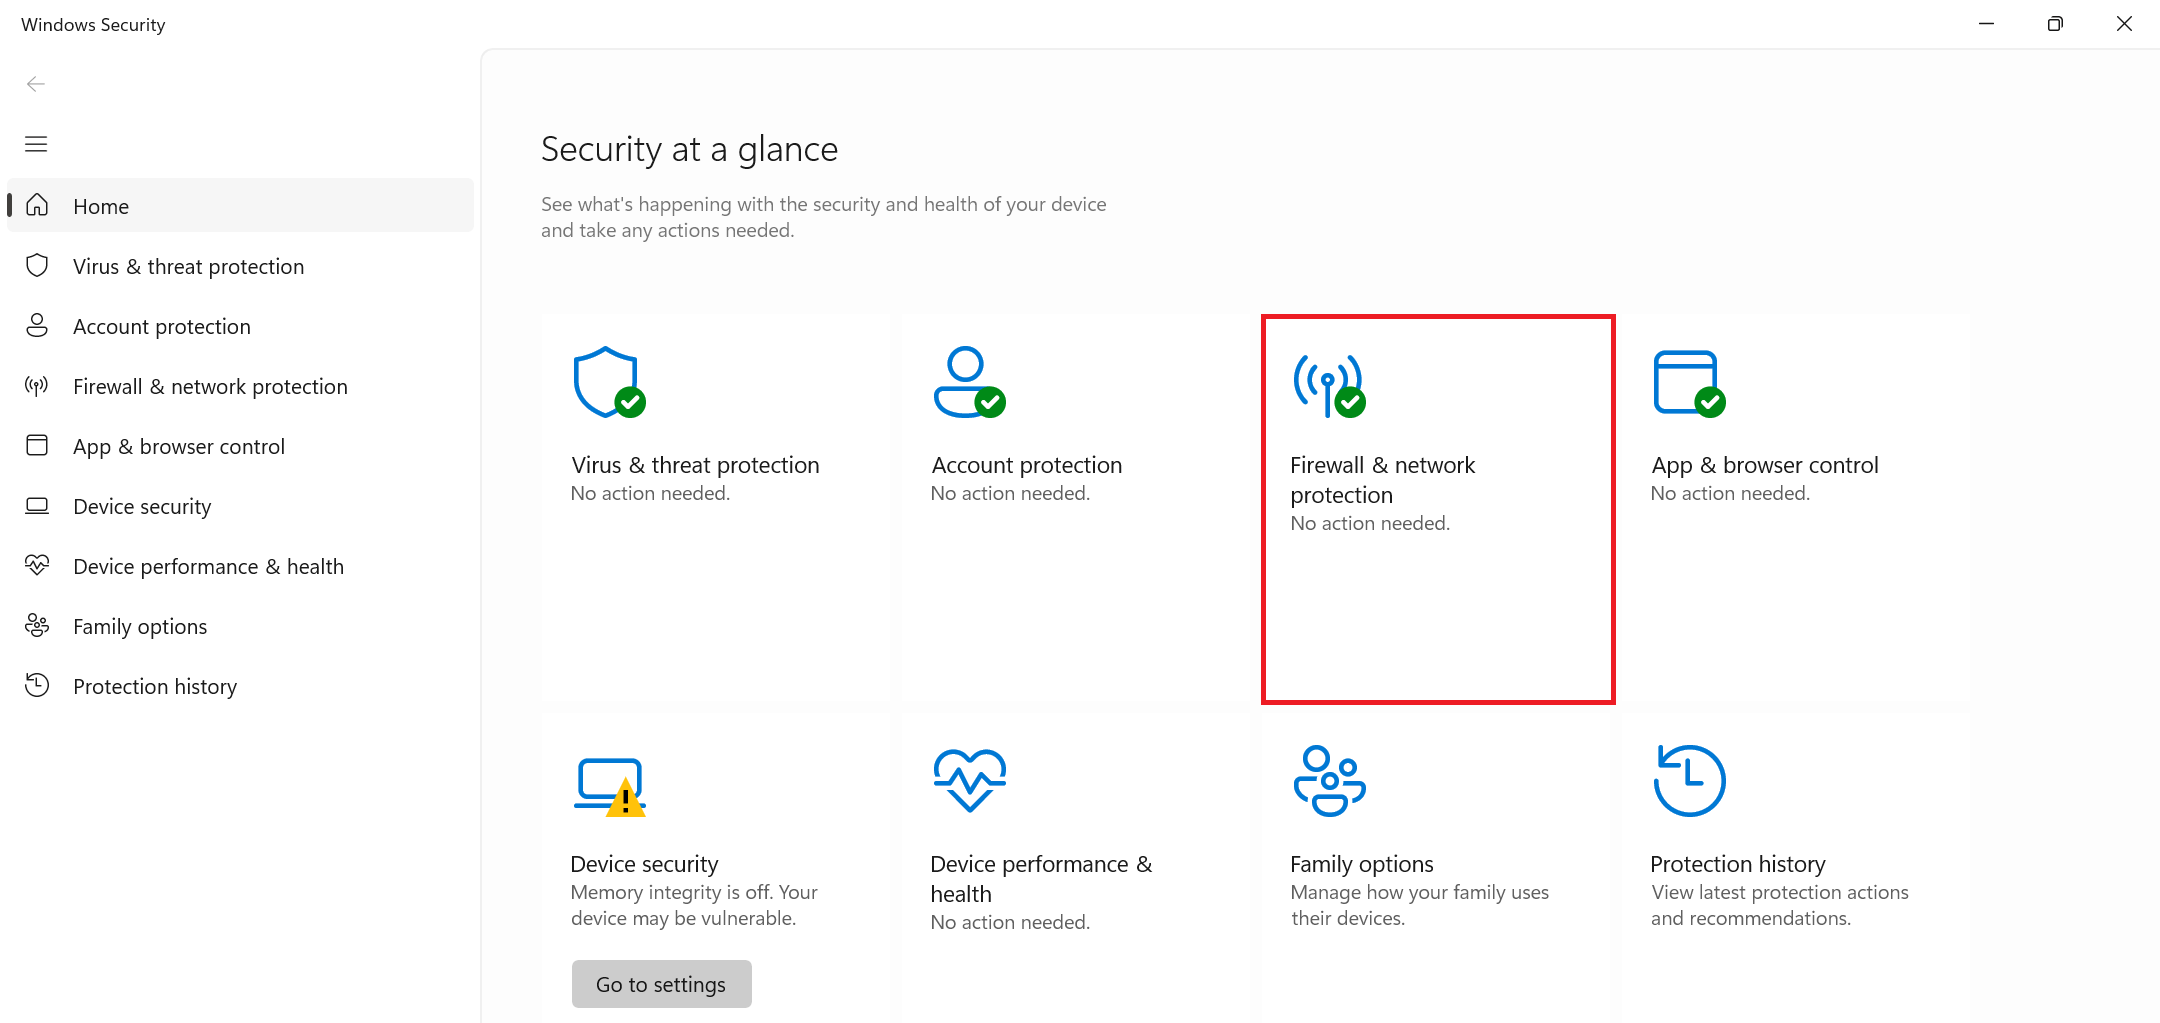 "Firewall & network protection" option highlighted in Windows Security.